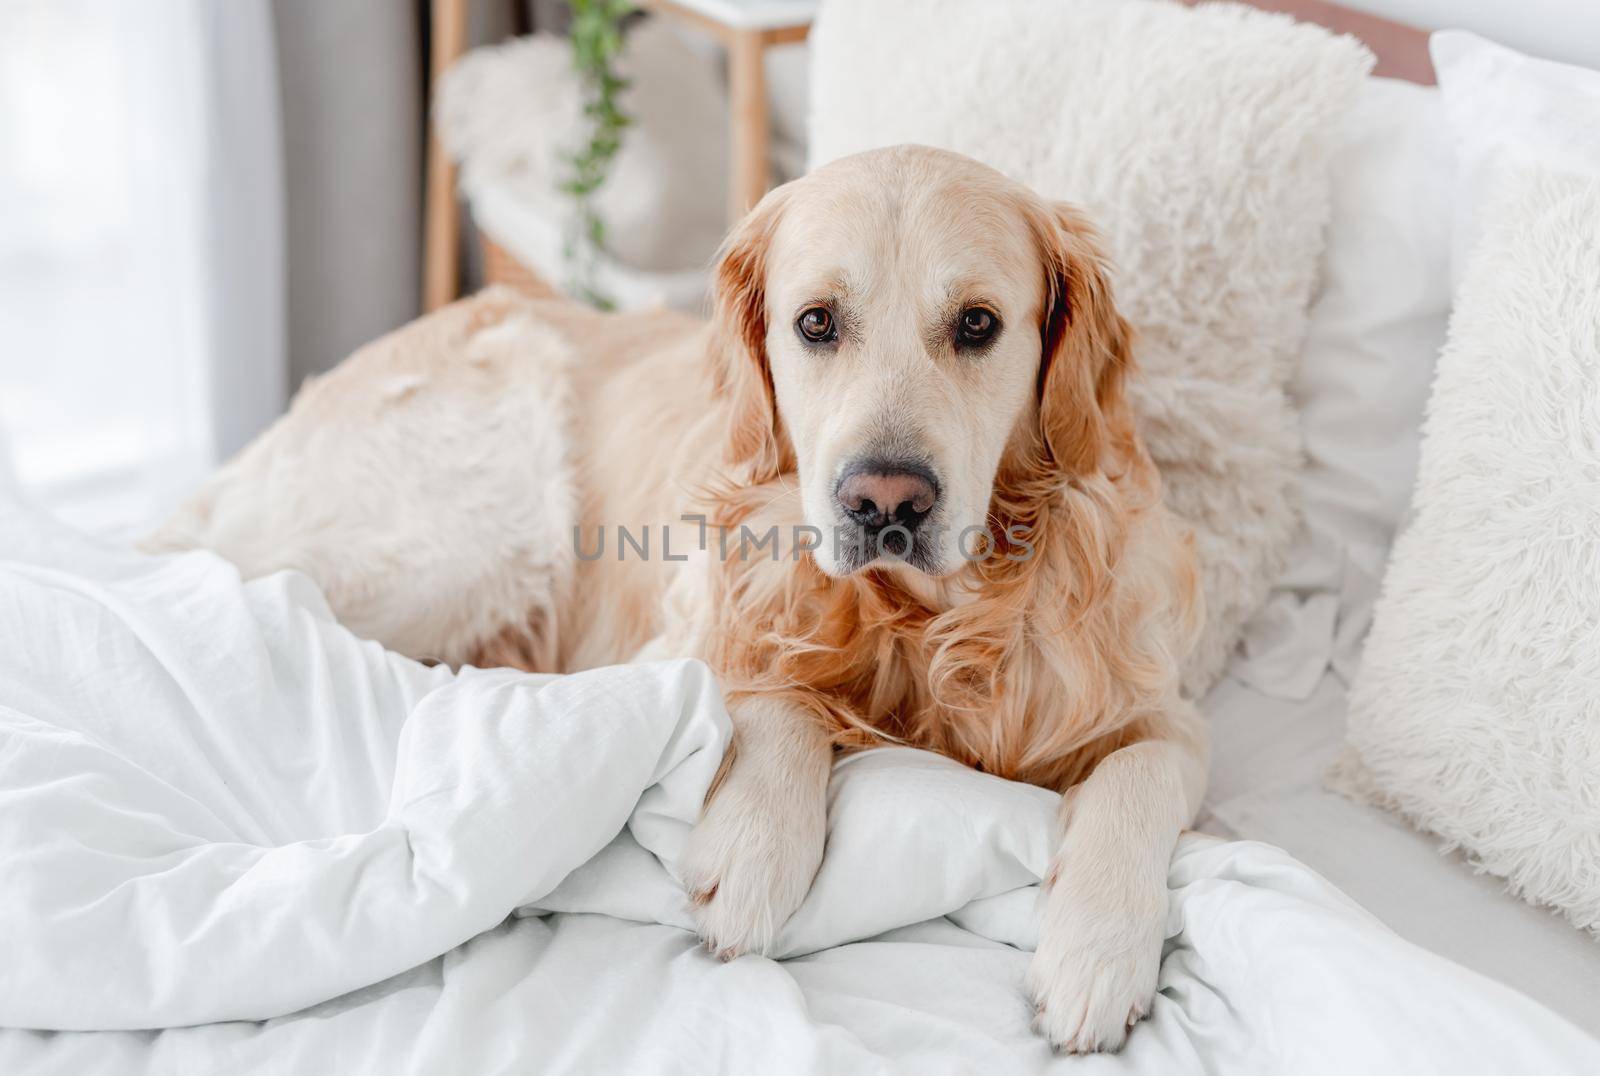 Golden retriever dog lying in the bed and looking at the camera. Cute doggy resting at home in the morning time. Portrait of pet indoors with daylight